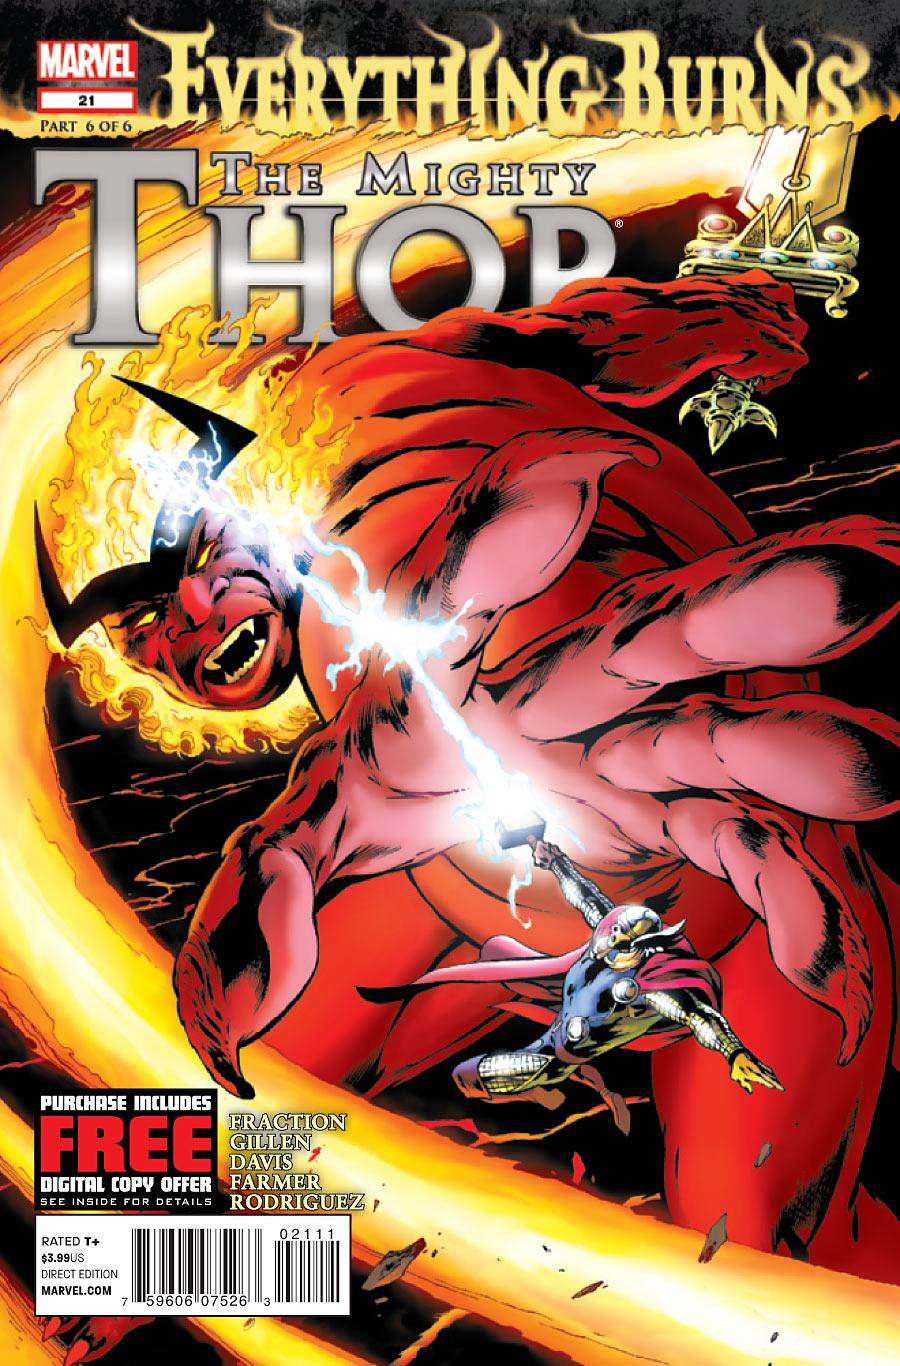 The Mighty Thor Vol. 1 #21